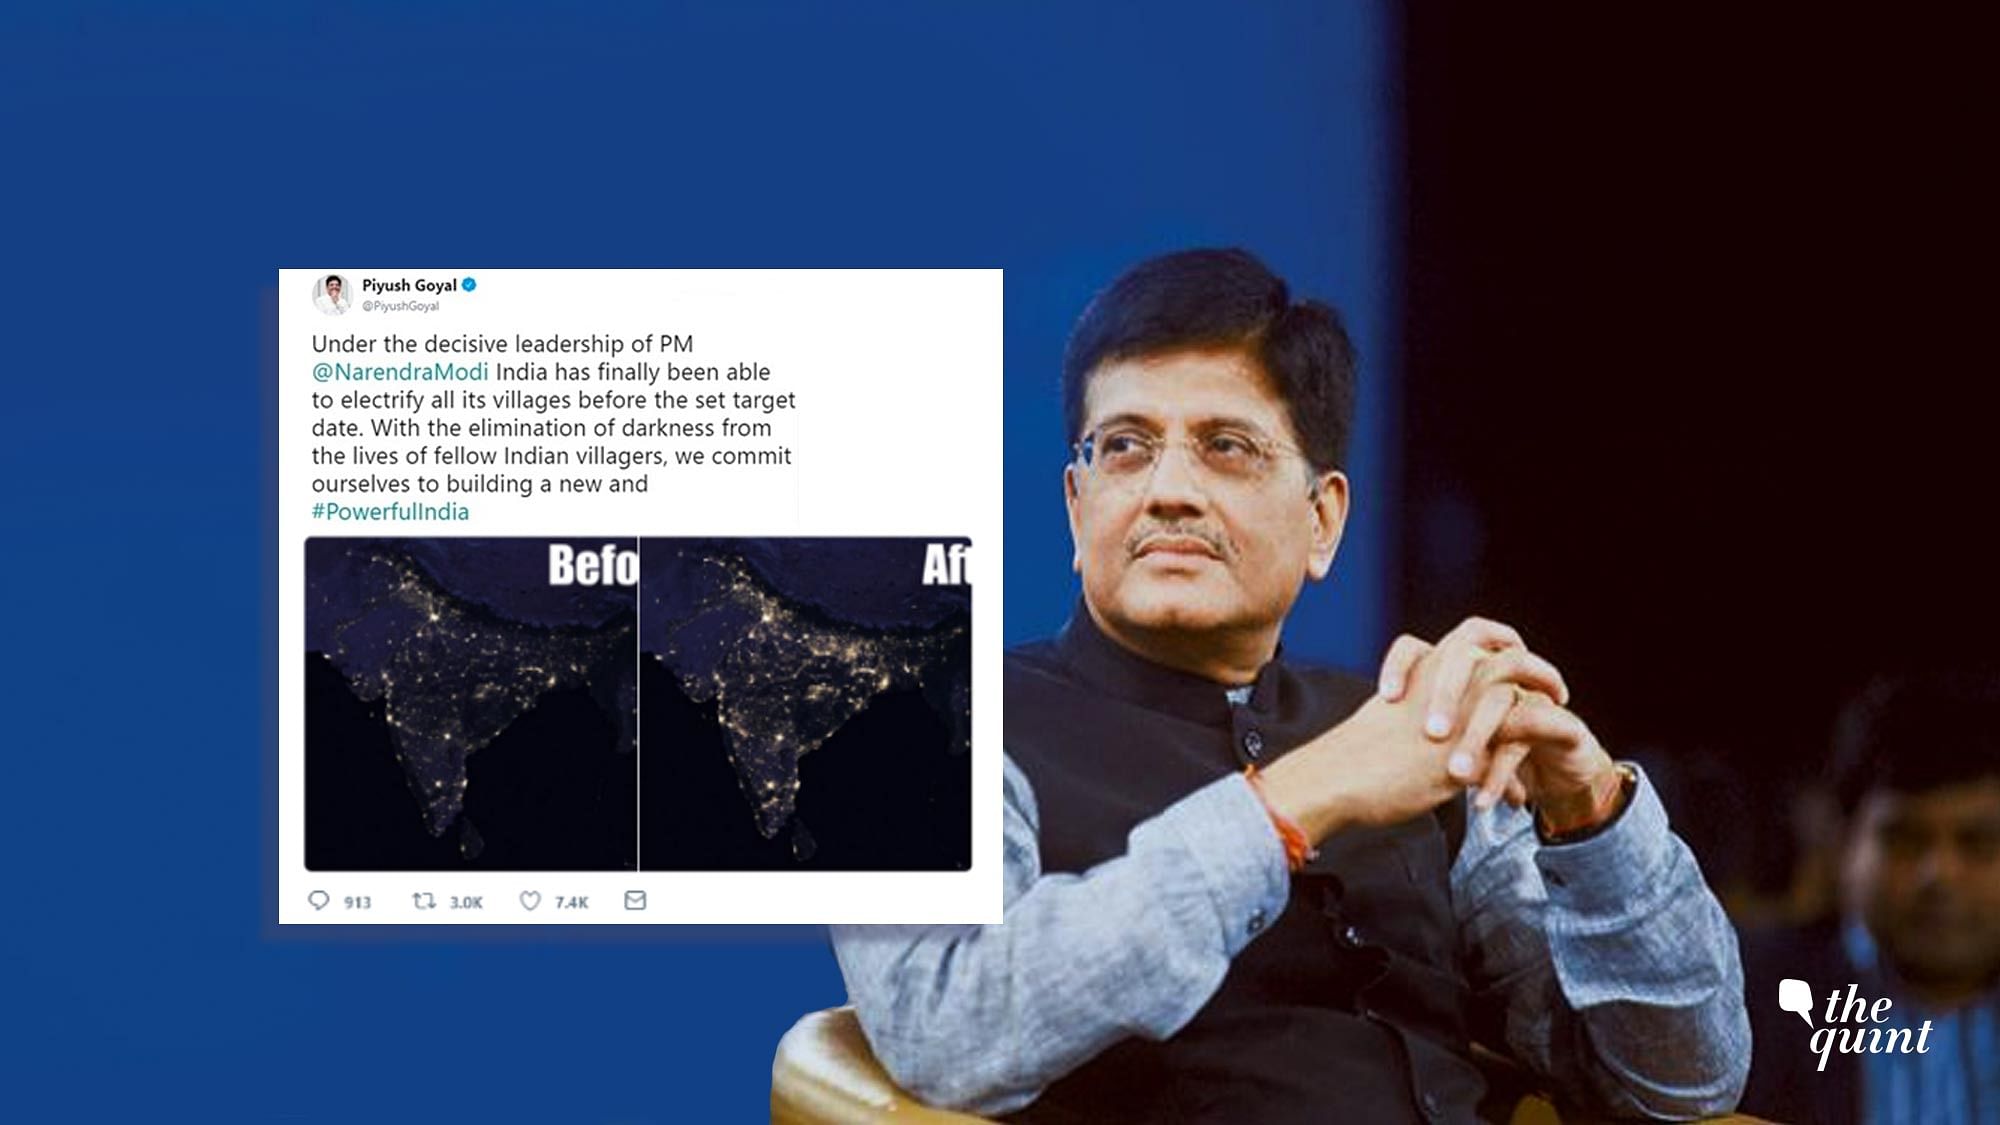 Railways Minister Piyush Goyal took to Twitter to congratulate PM Modi for successfully electrifying Indian villages.